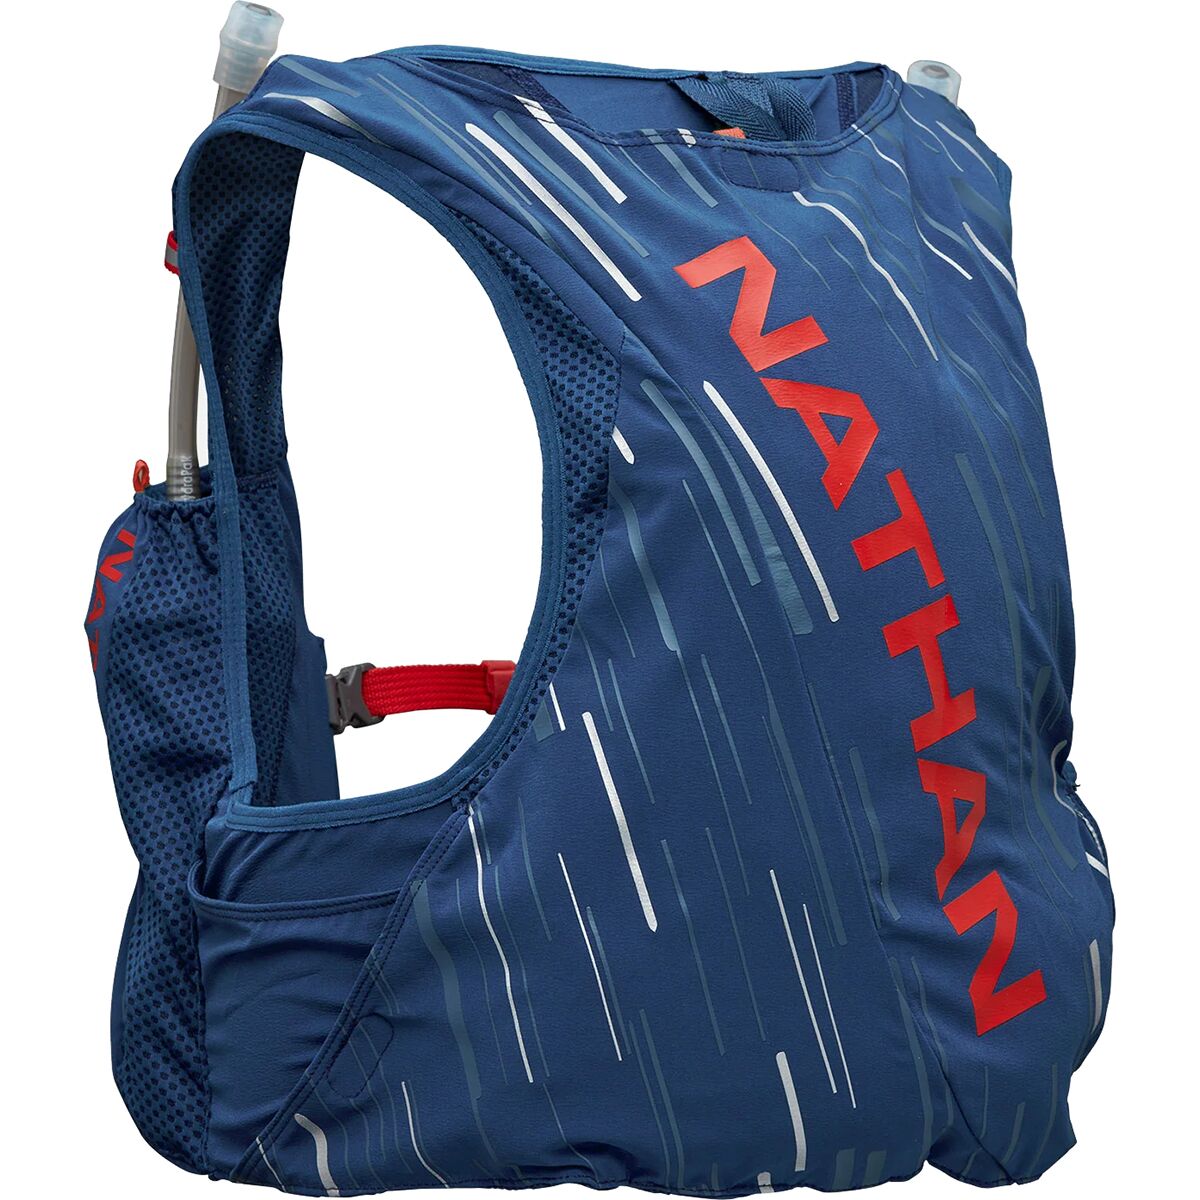 Nathan Pinnacle 4L Hydration Vest | Backcountry